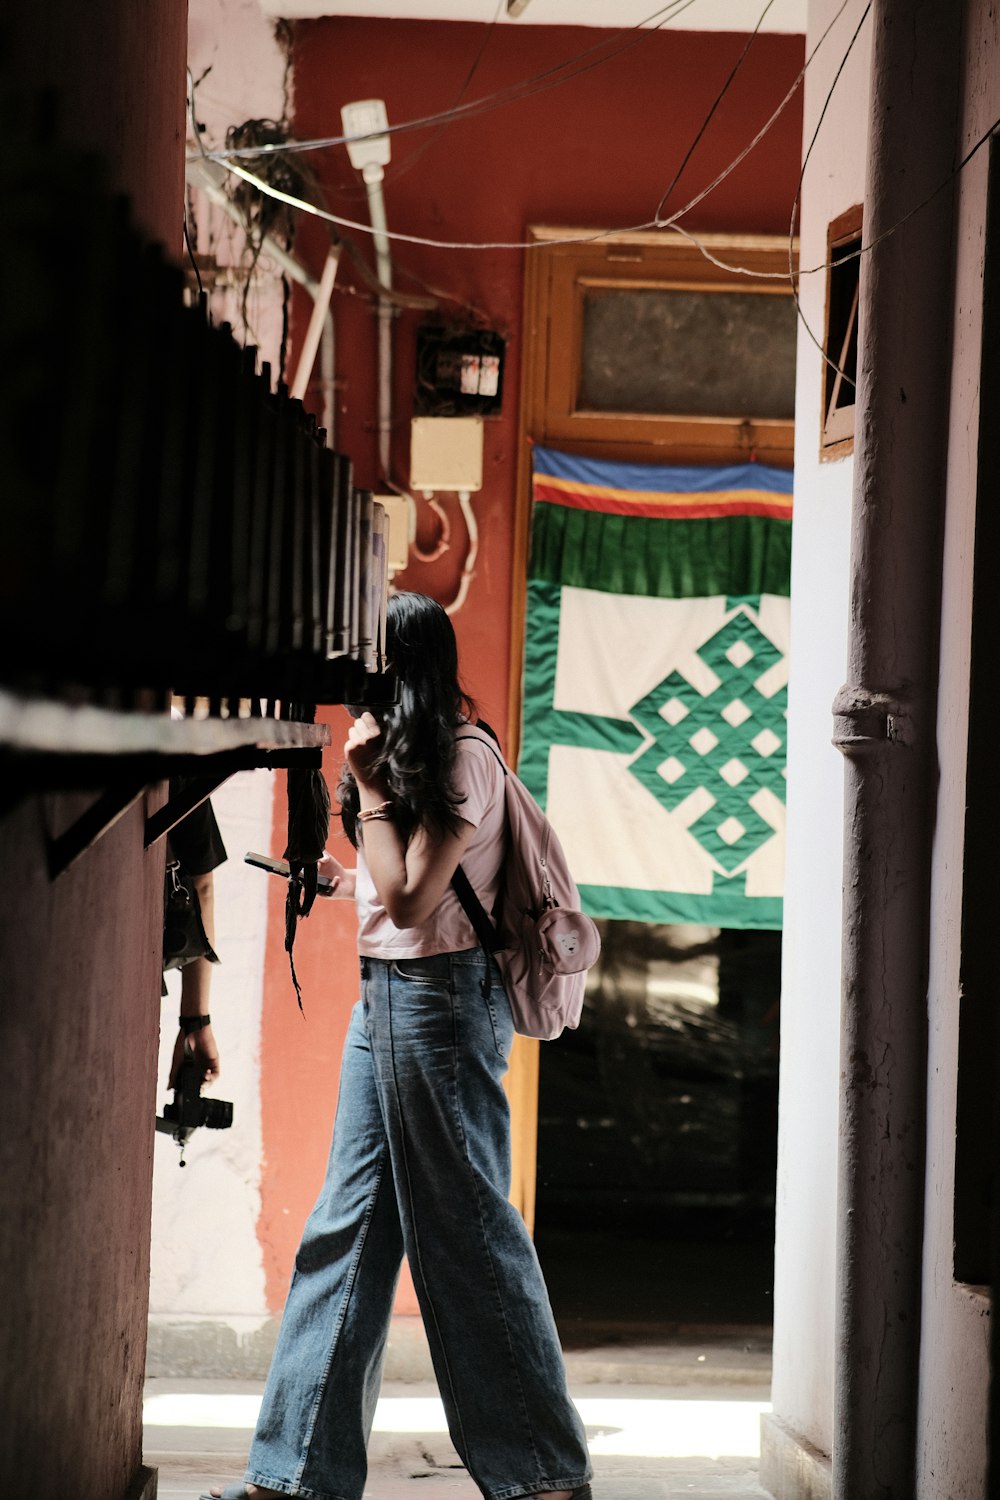 a woman walking down a hallway carrying a camera